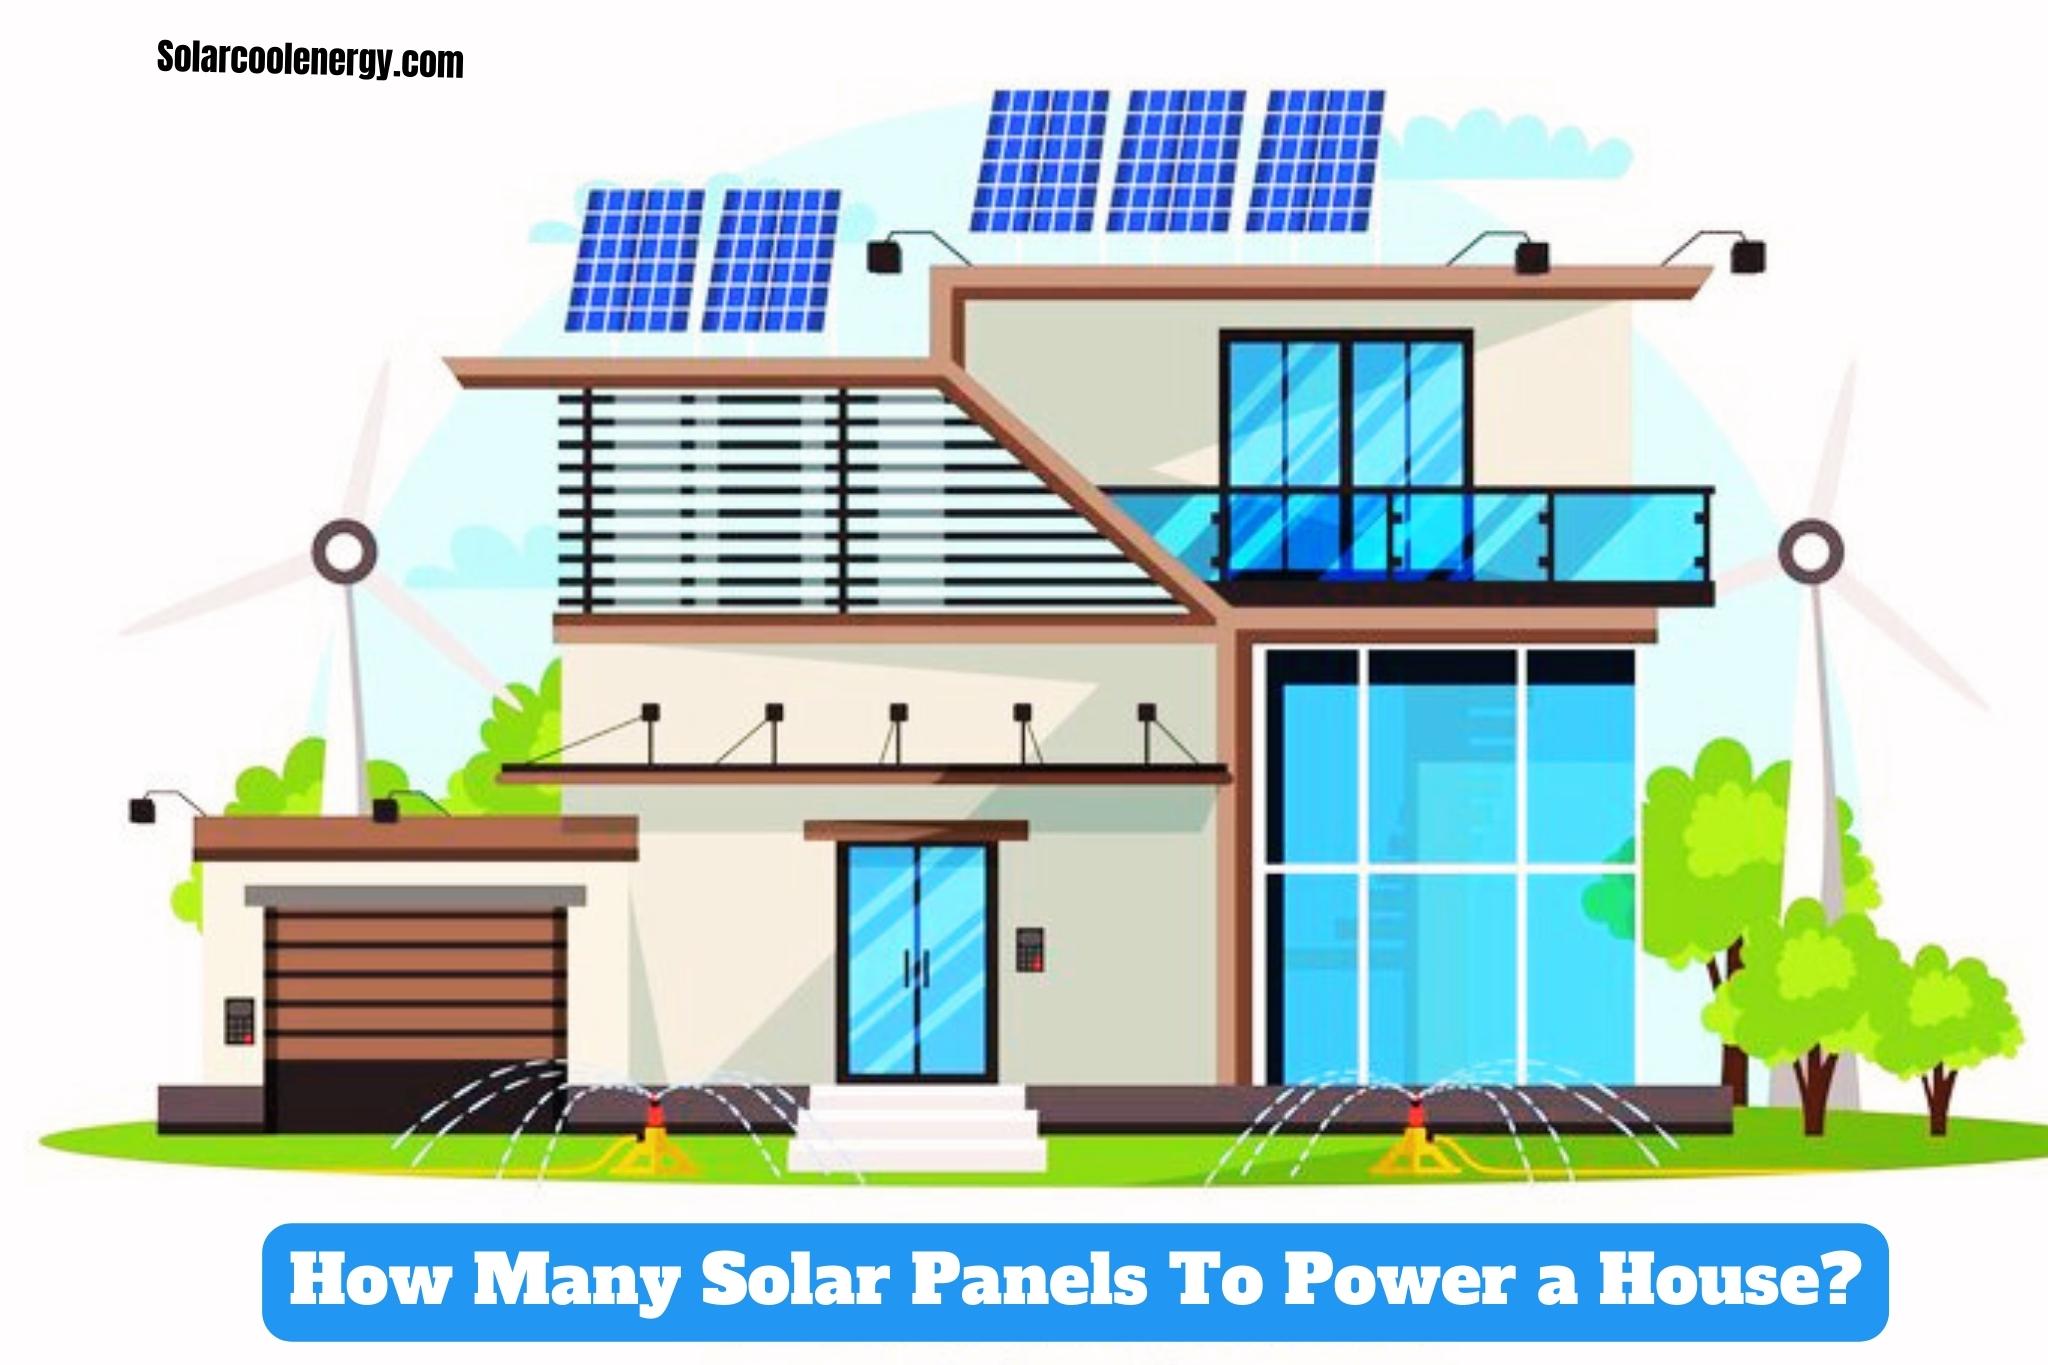 How Many Solar Panels To Power a House